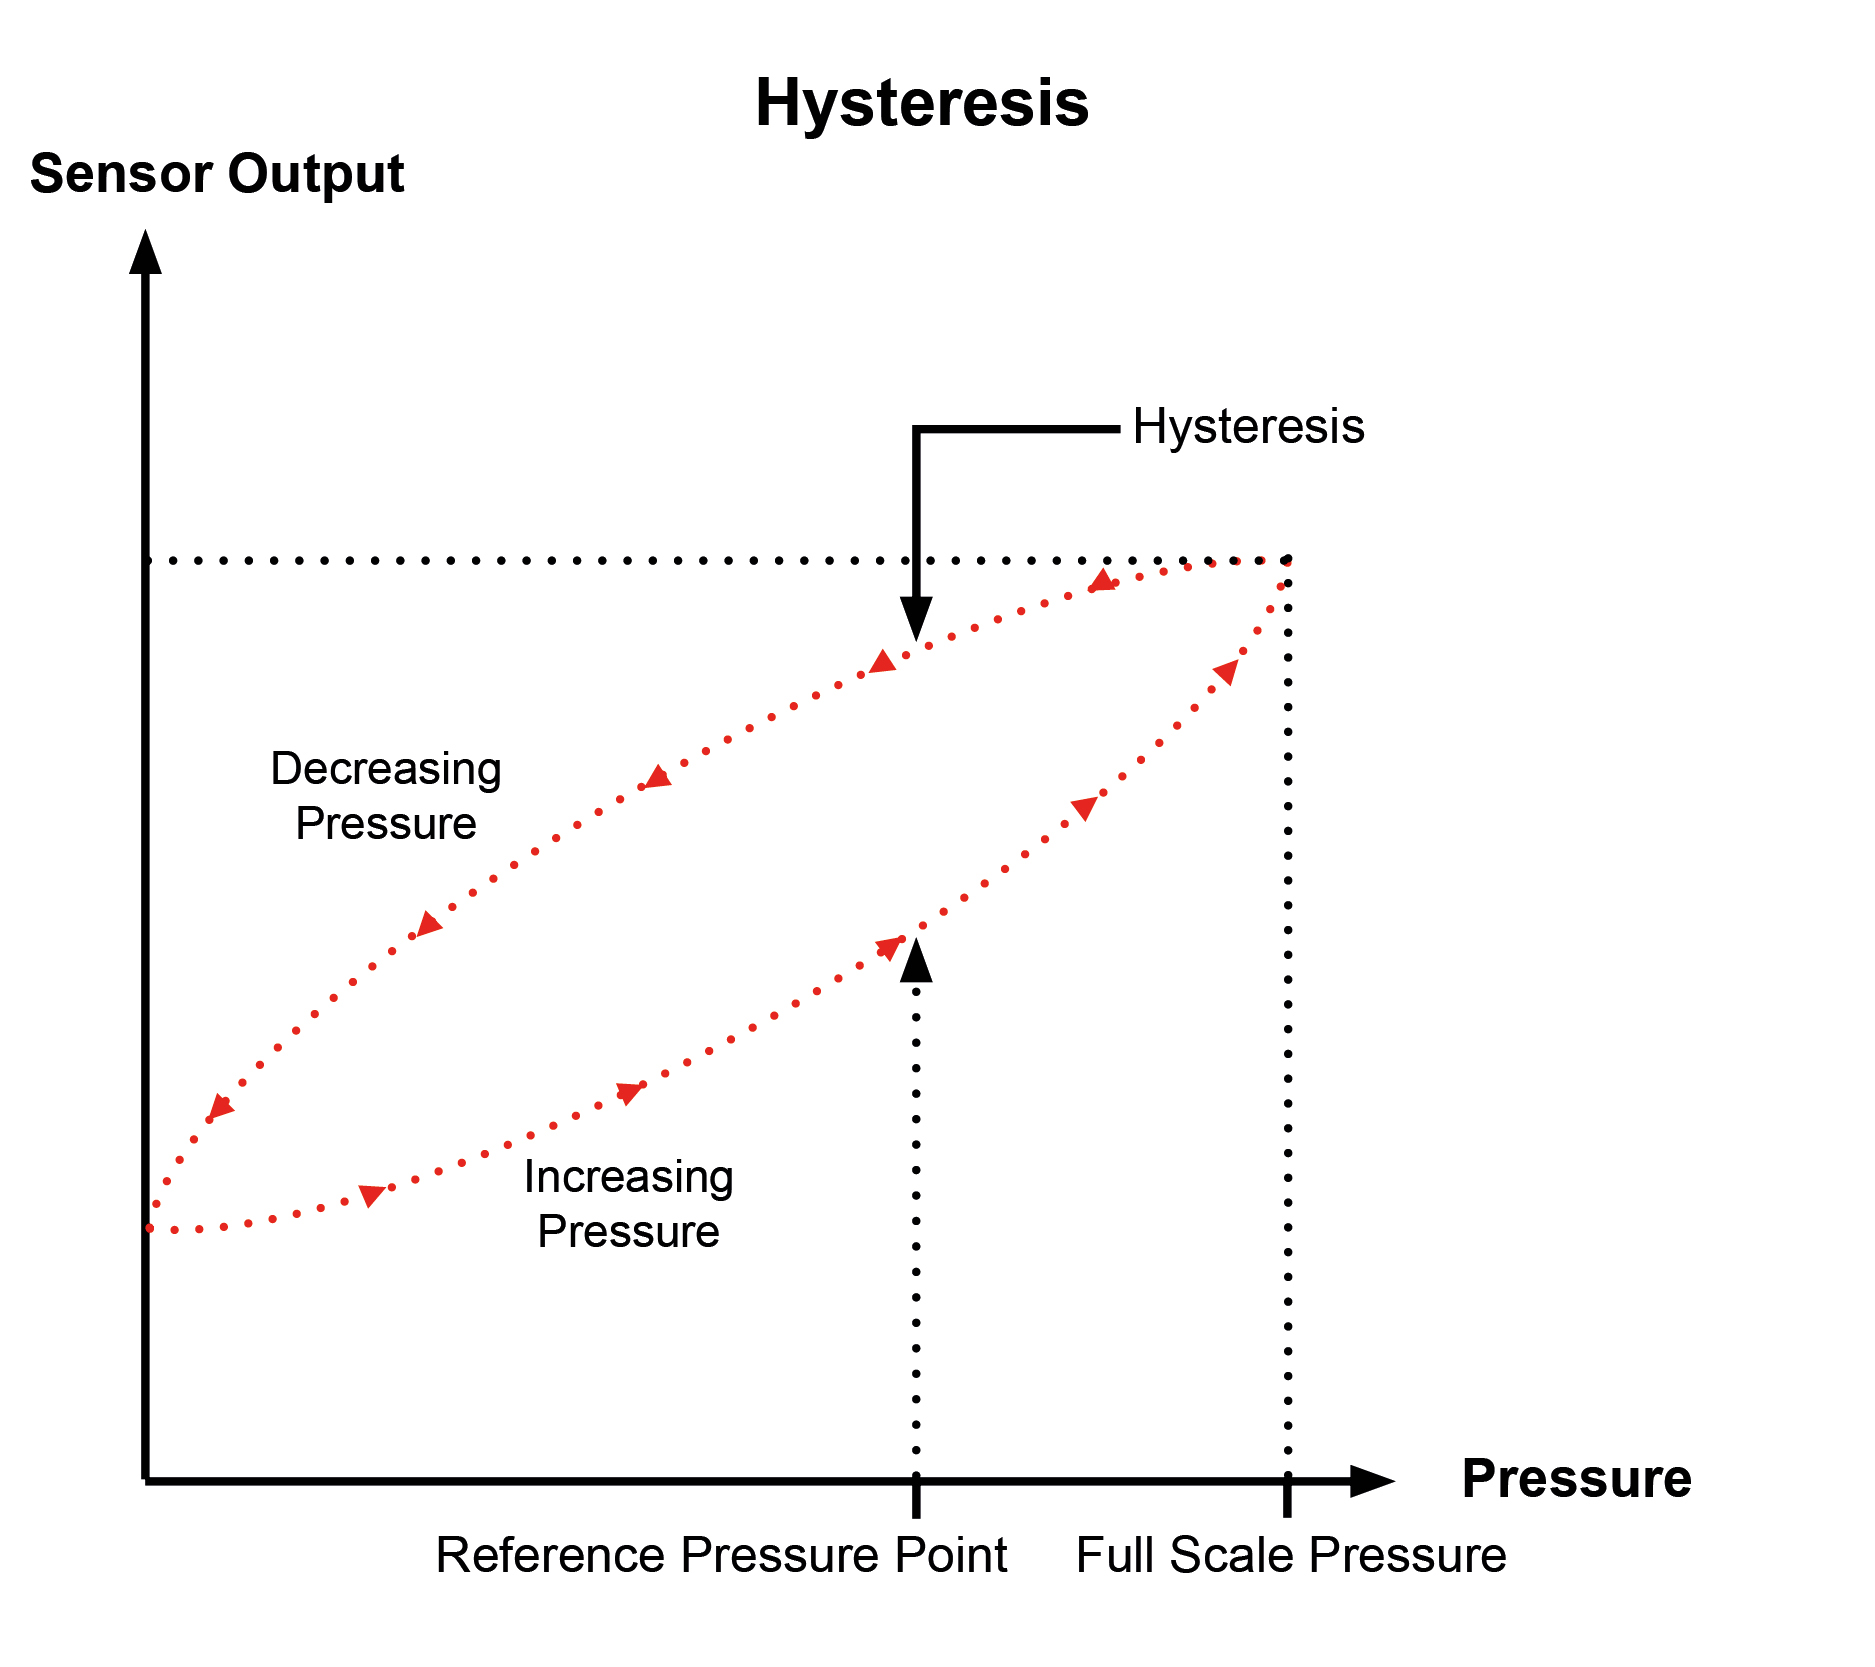 What are Hysteresis Errors?